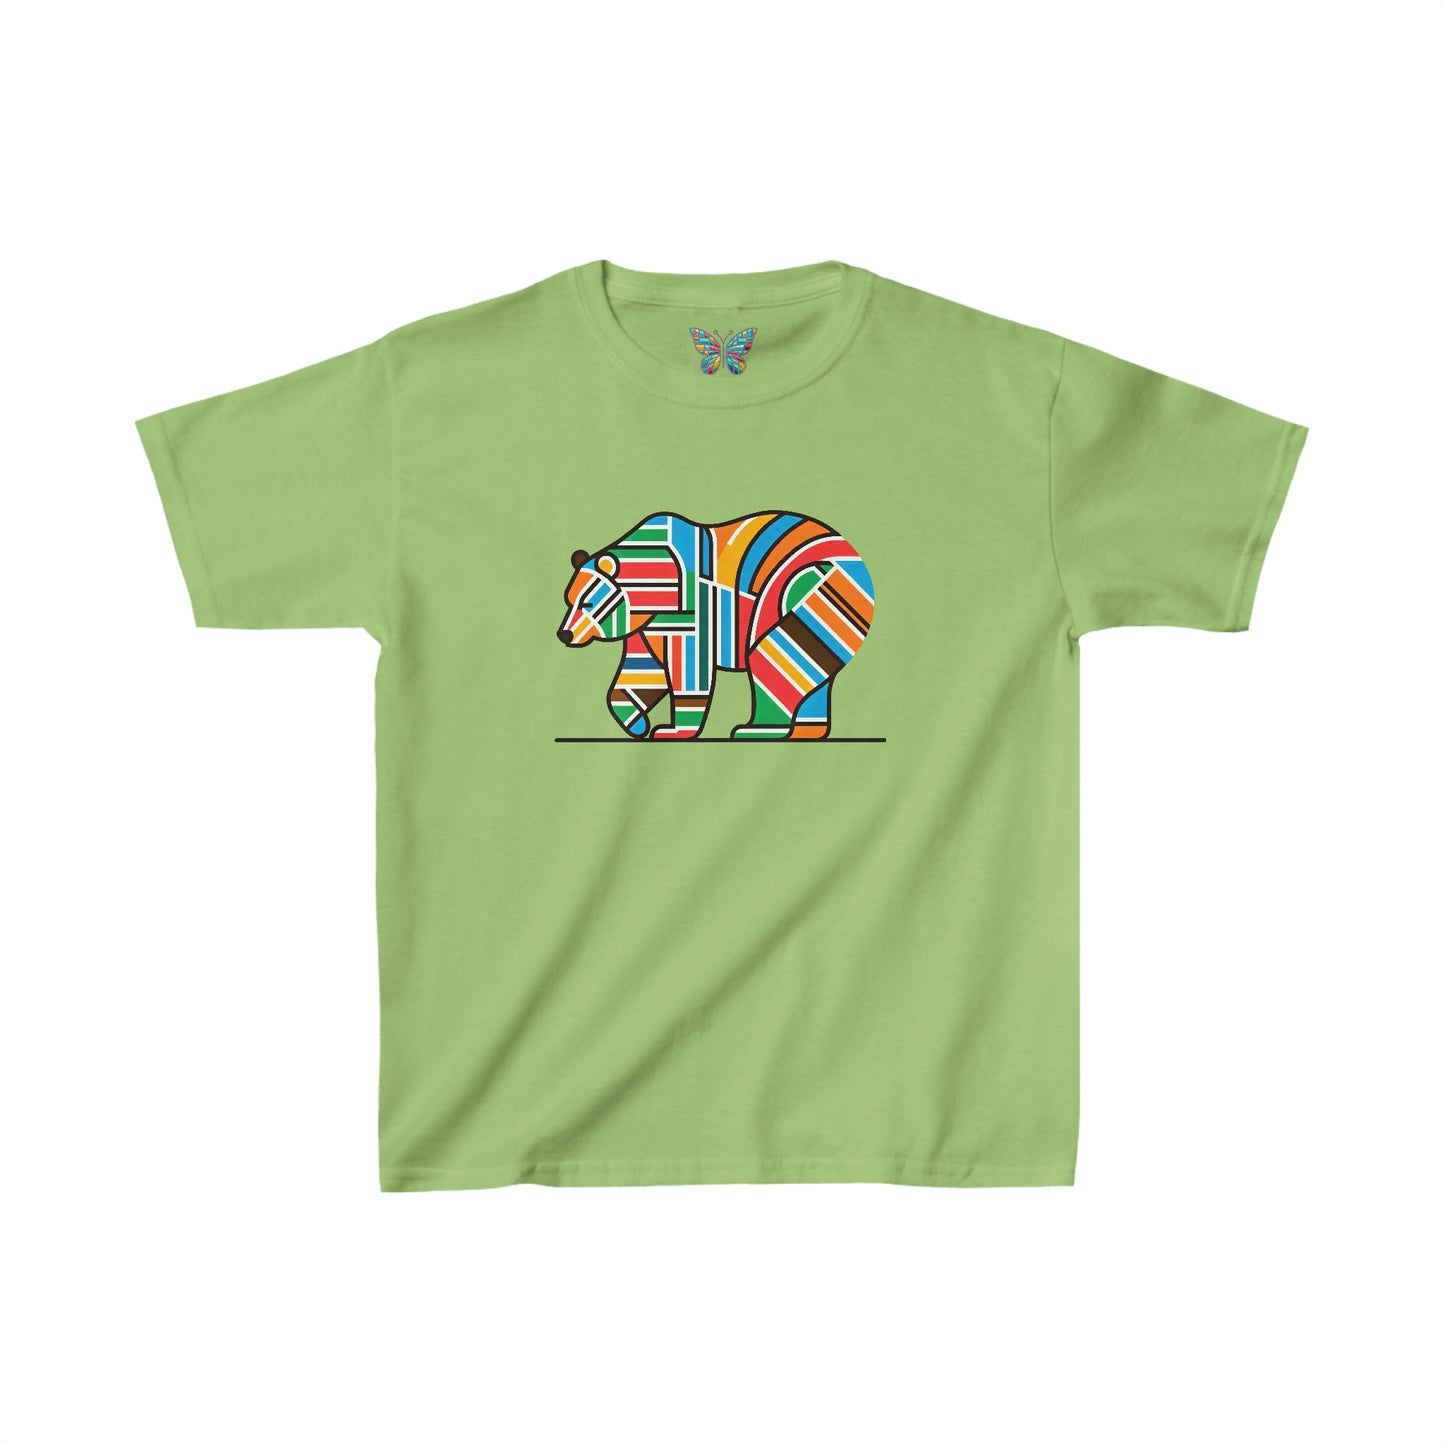 Grizzly Bear Joviscape - Youth - Snazzle Tee